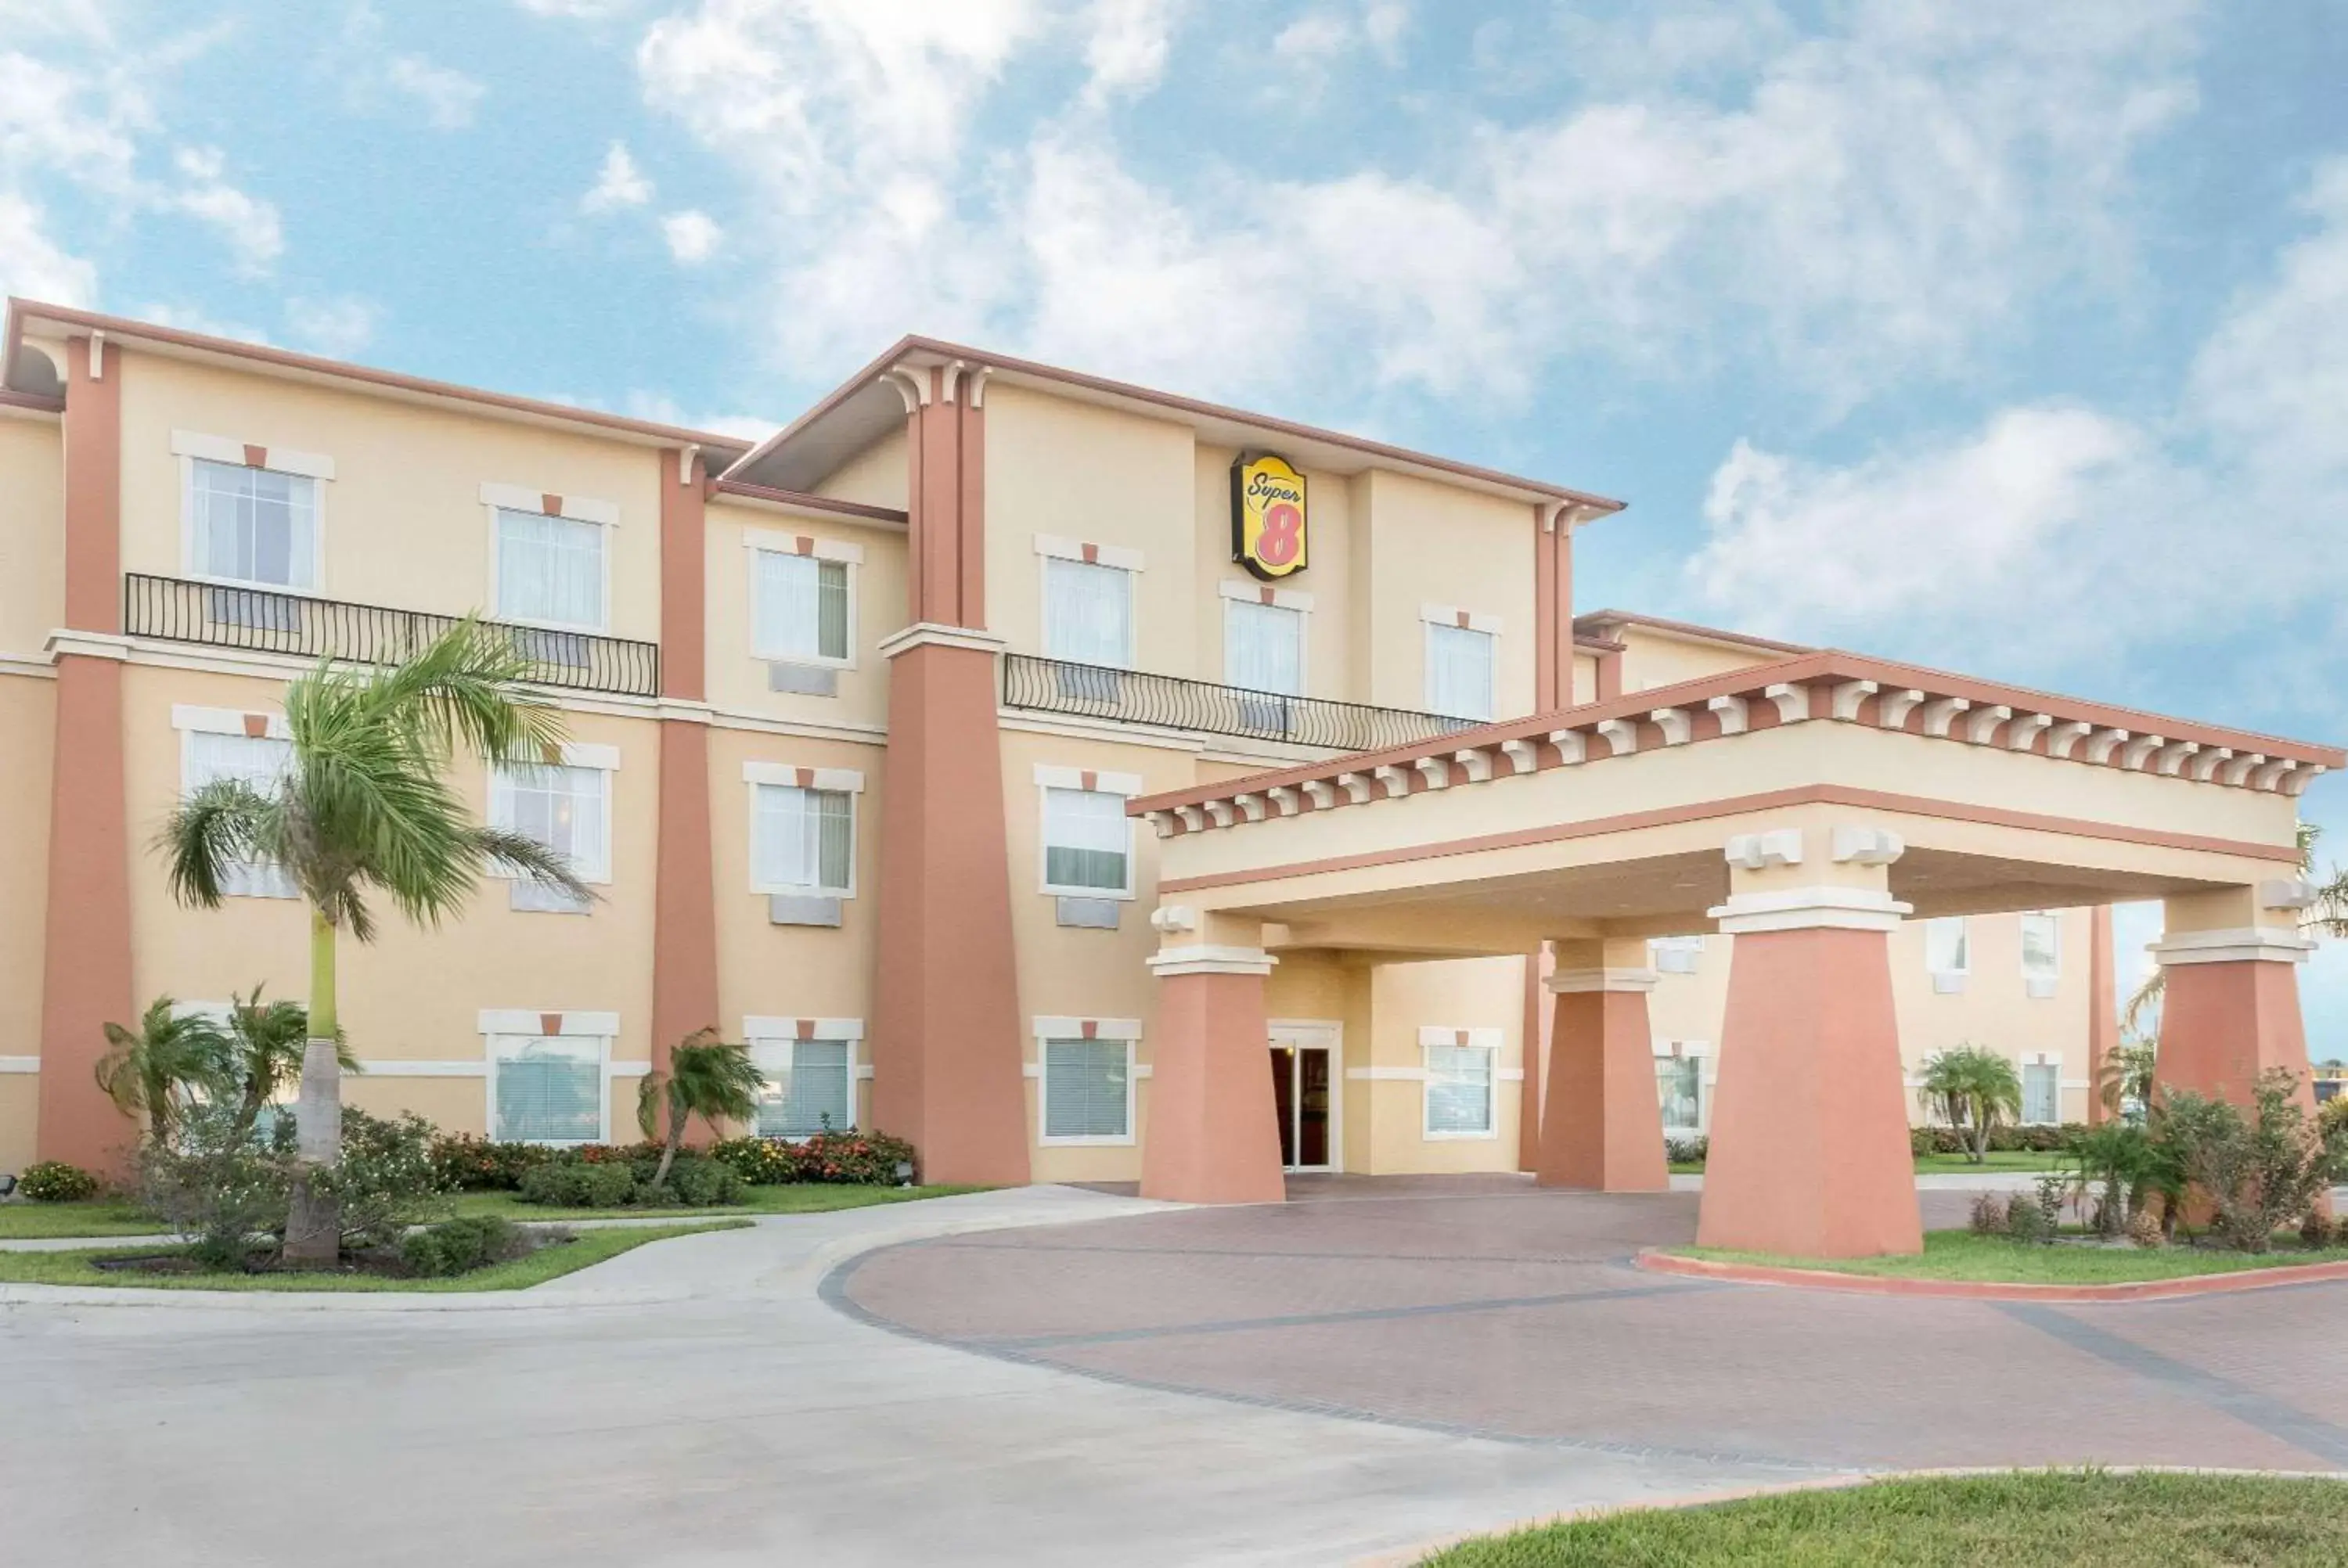 Property building in Super 8 by Wyndham Hidalgo at La Plaza Mall & Mcallen Airport